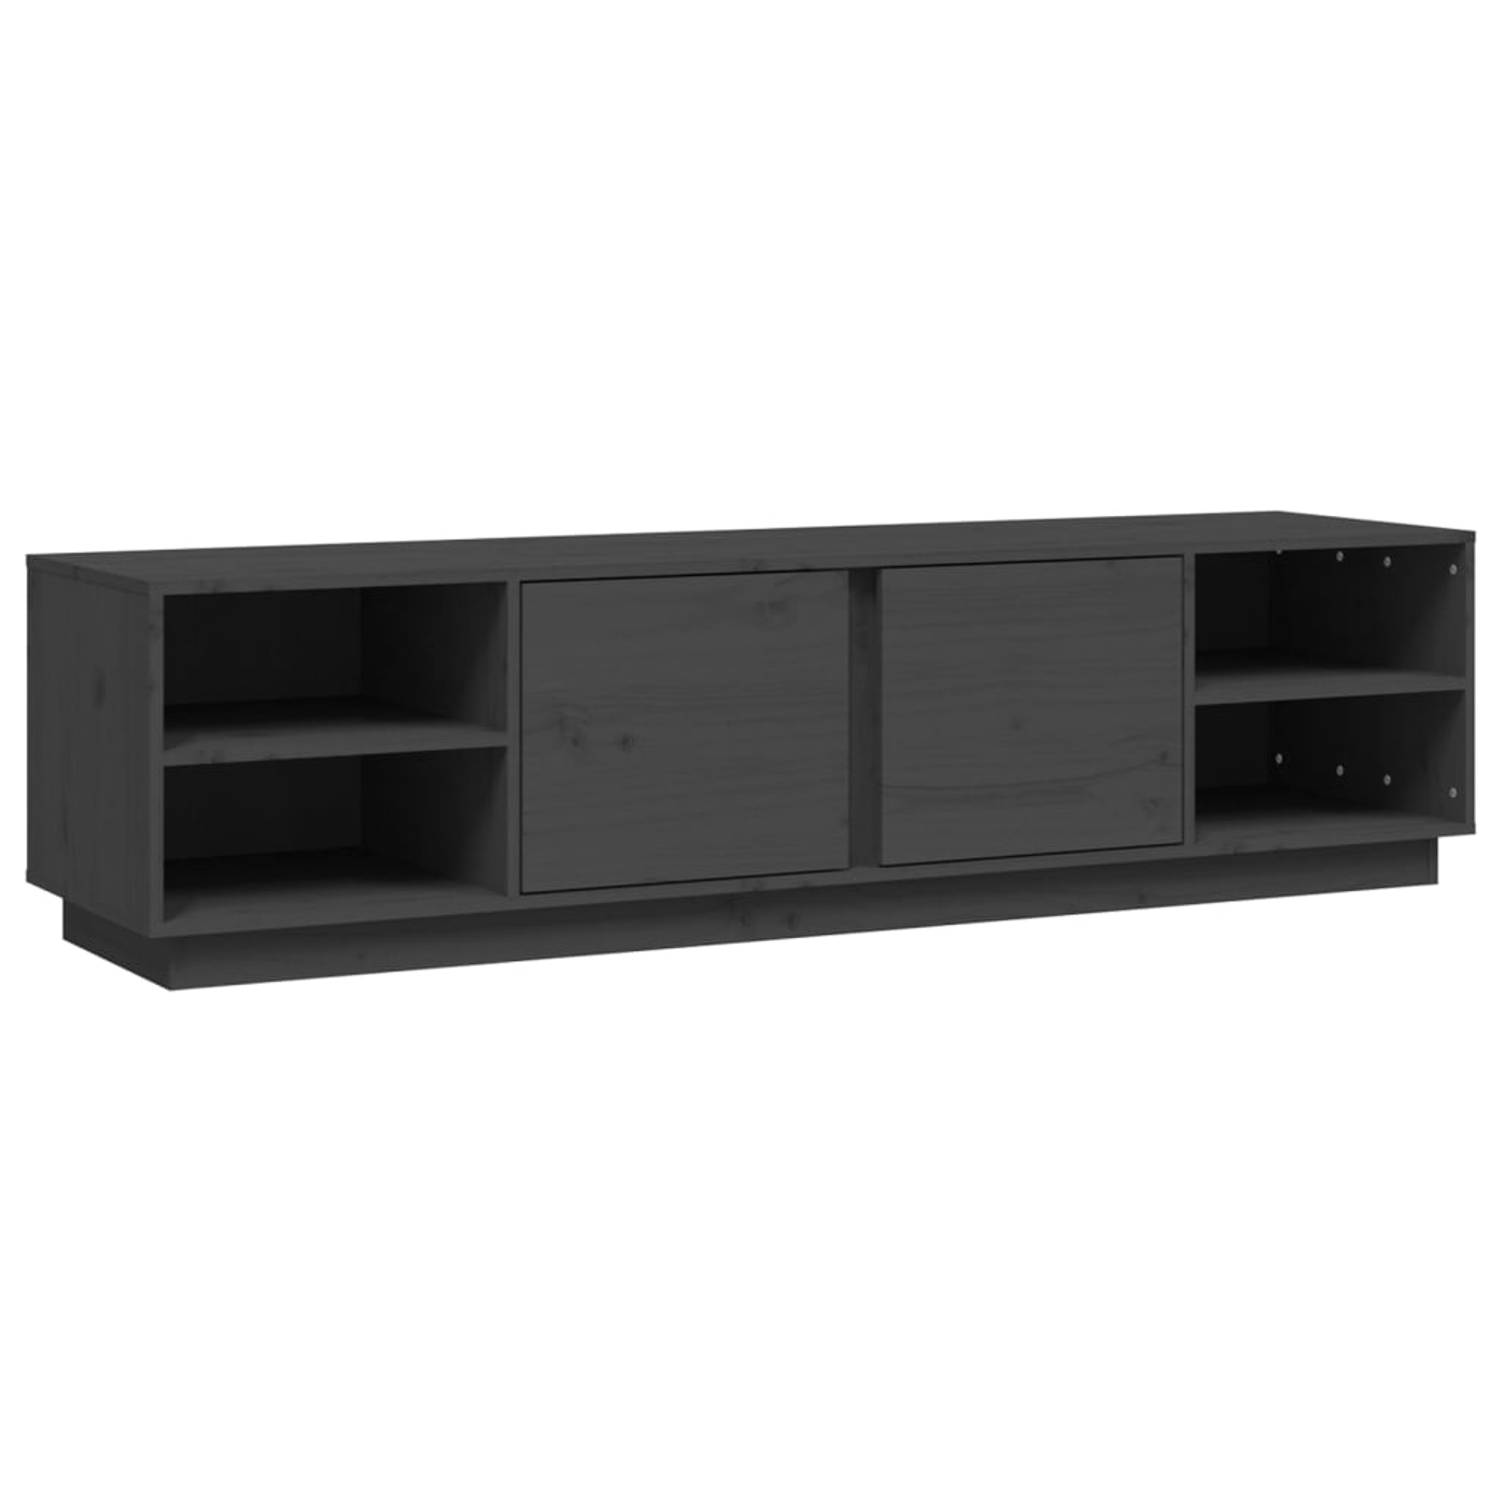 The Living Store TV-kast - Serie- Trendy - Productgroep- Meubels - 156 x 40 x 40 cm - Massief grenenhout